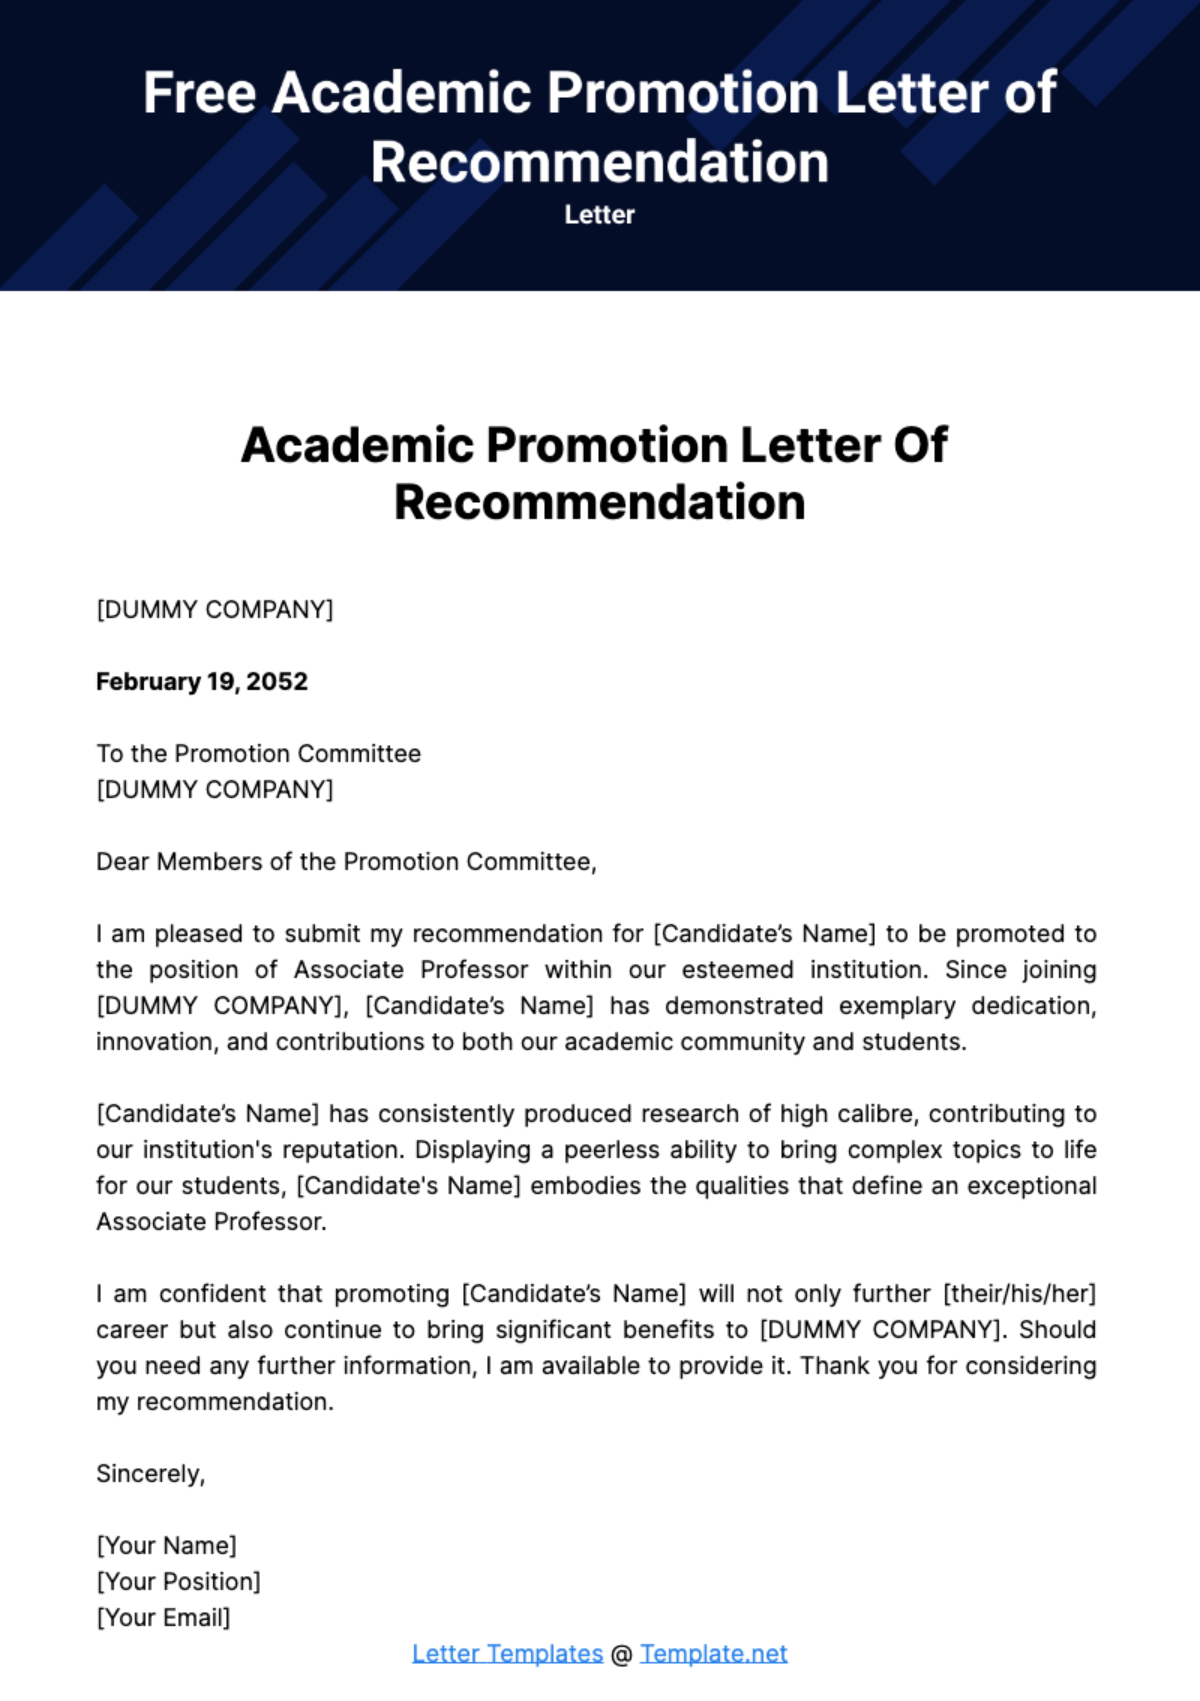 Academic Promotion Letter of Recommendation Template